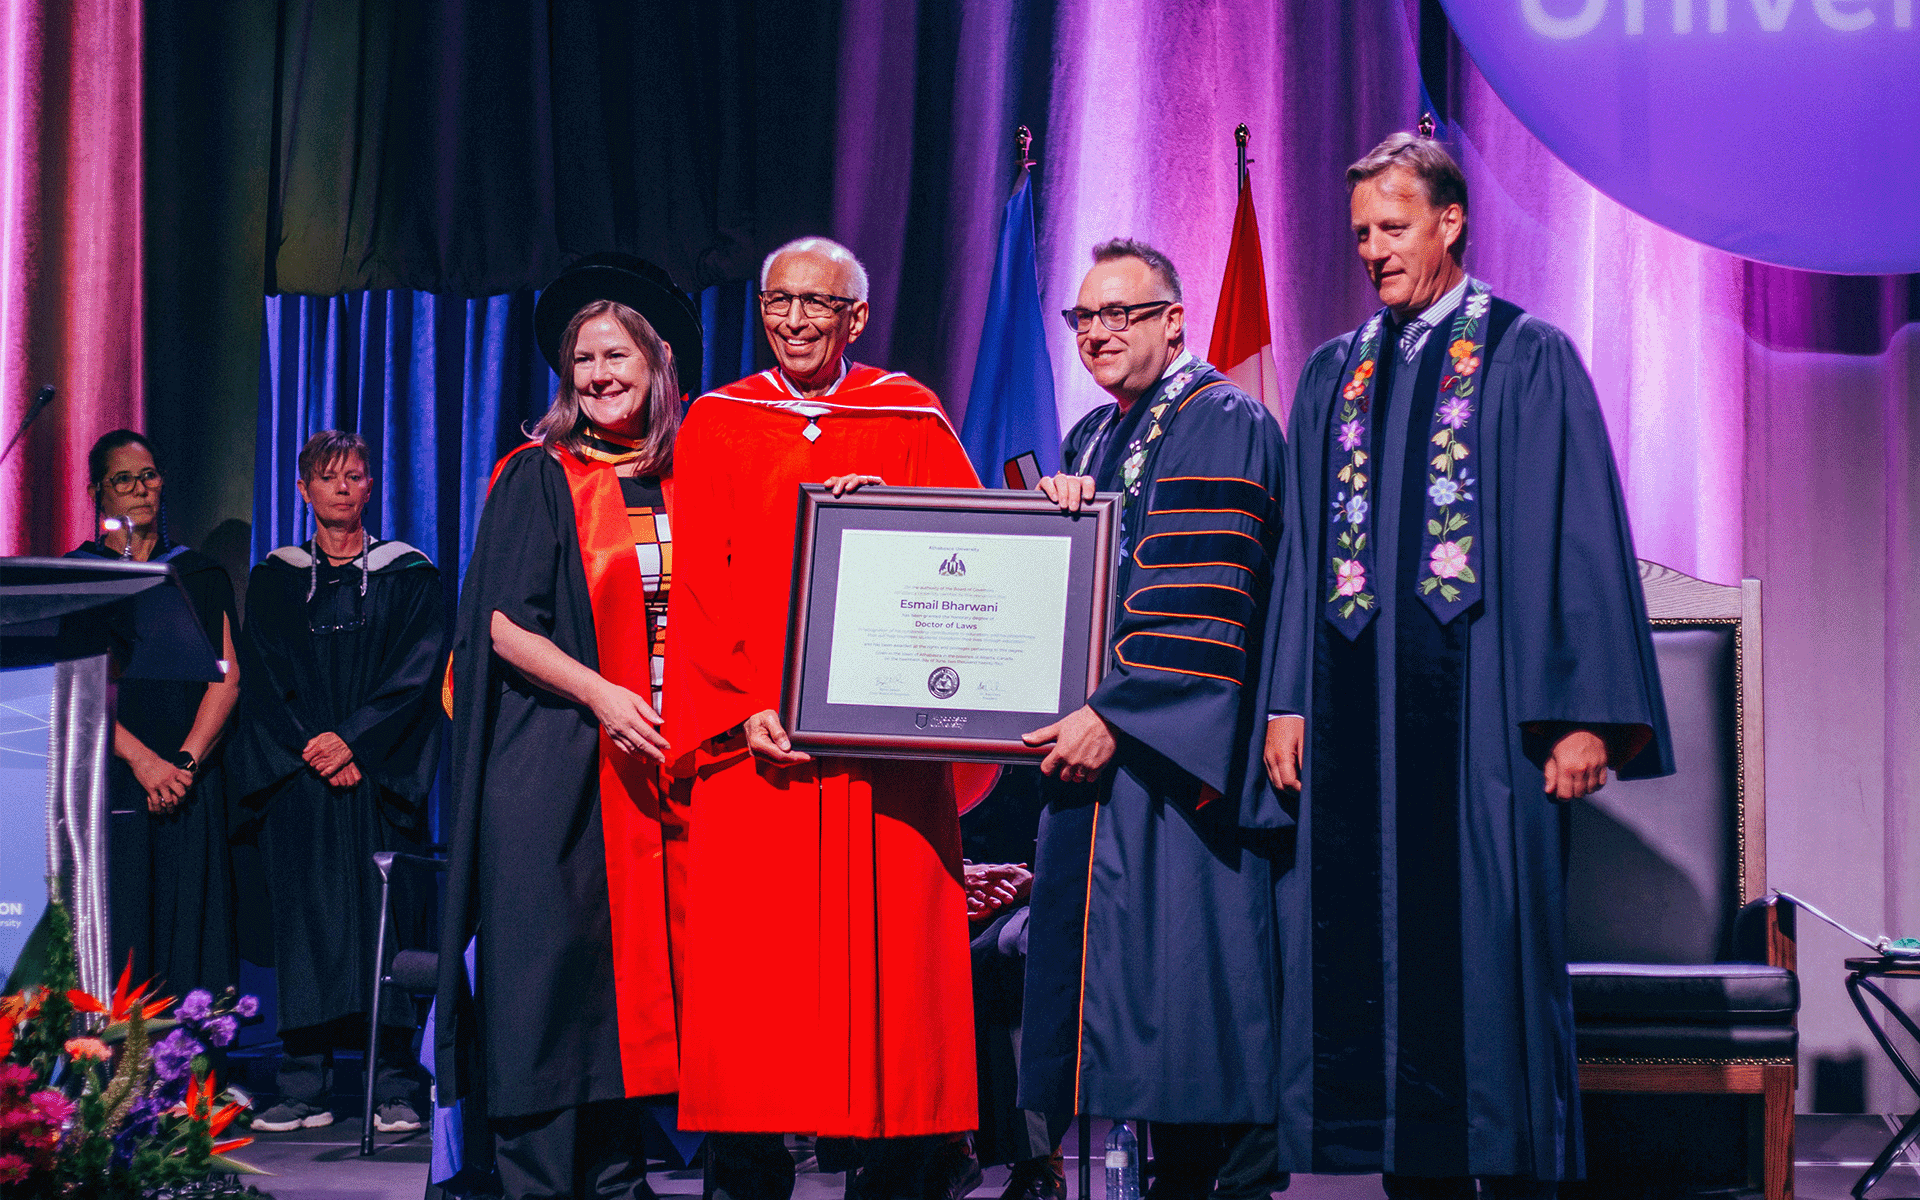 A woman and three men standing together with one of them holding a large framed document for Esmail Bharwani's Honorary Doctor of Laws during the convocation ceremony